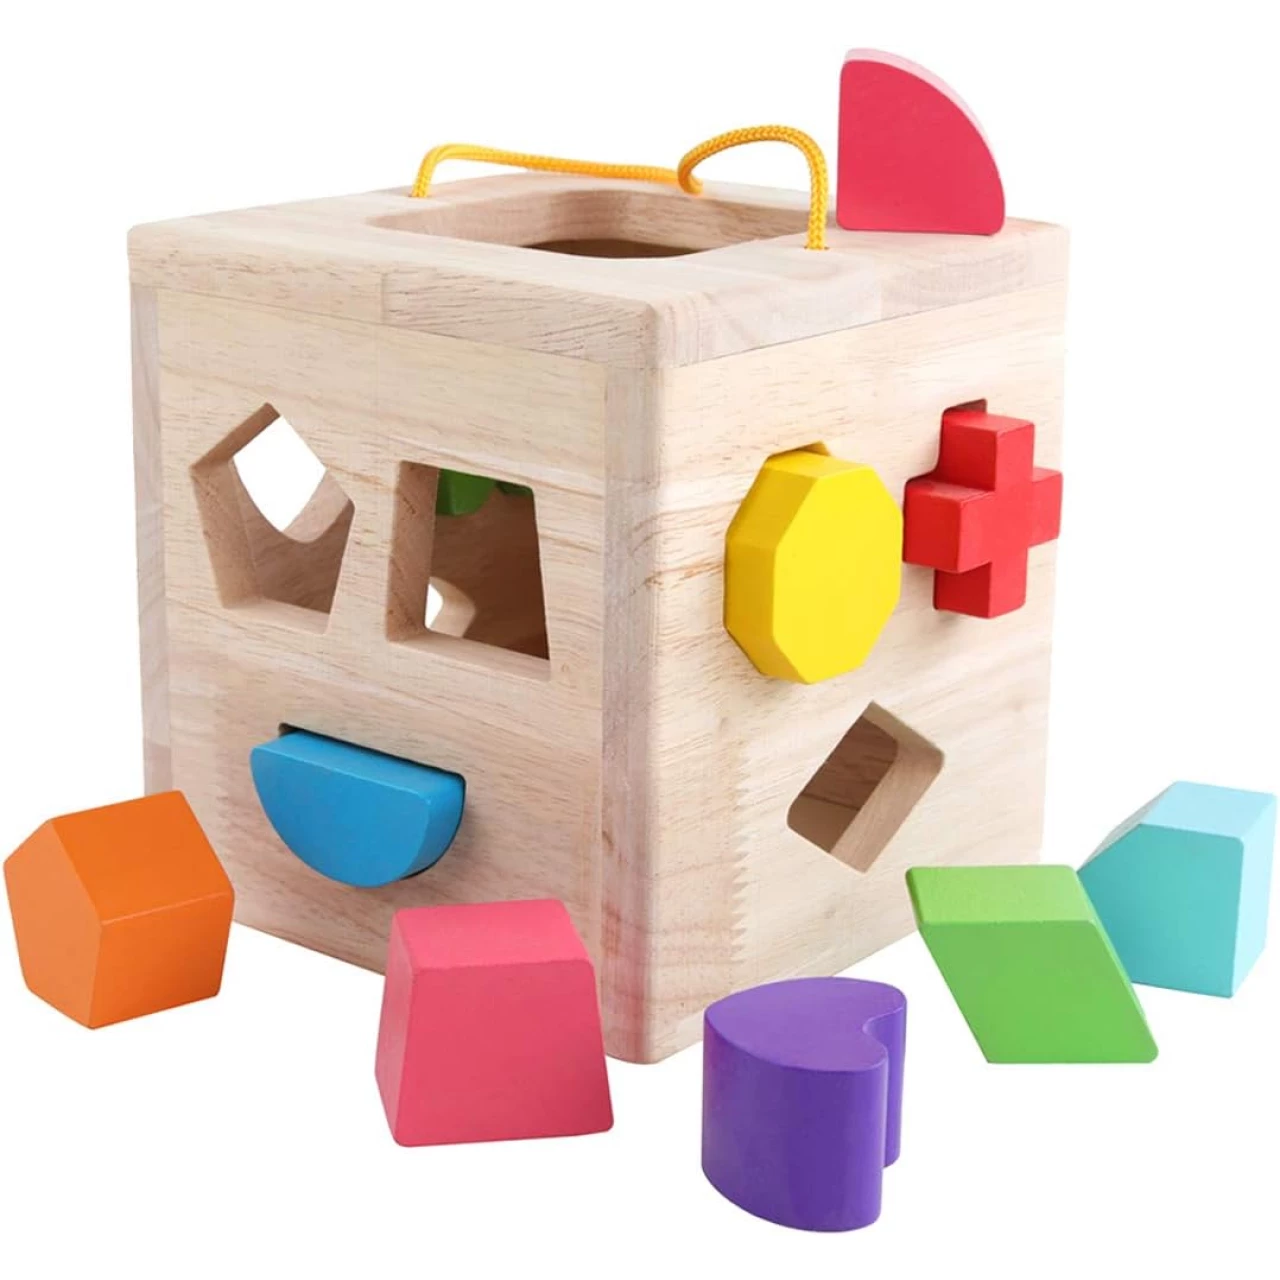 GEMEM Shape Sorter Toy My First Wooden 12 Building Blocks Geometry Learning Matching Sorting Gifts Didactic Classic Toys for Toddlers Baby Kids 2 3 Years Old